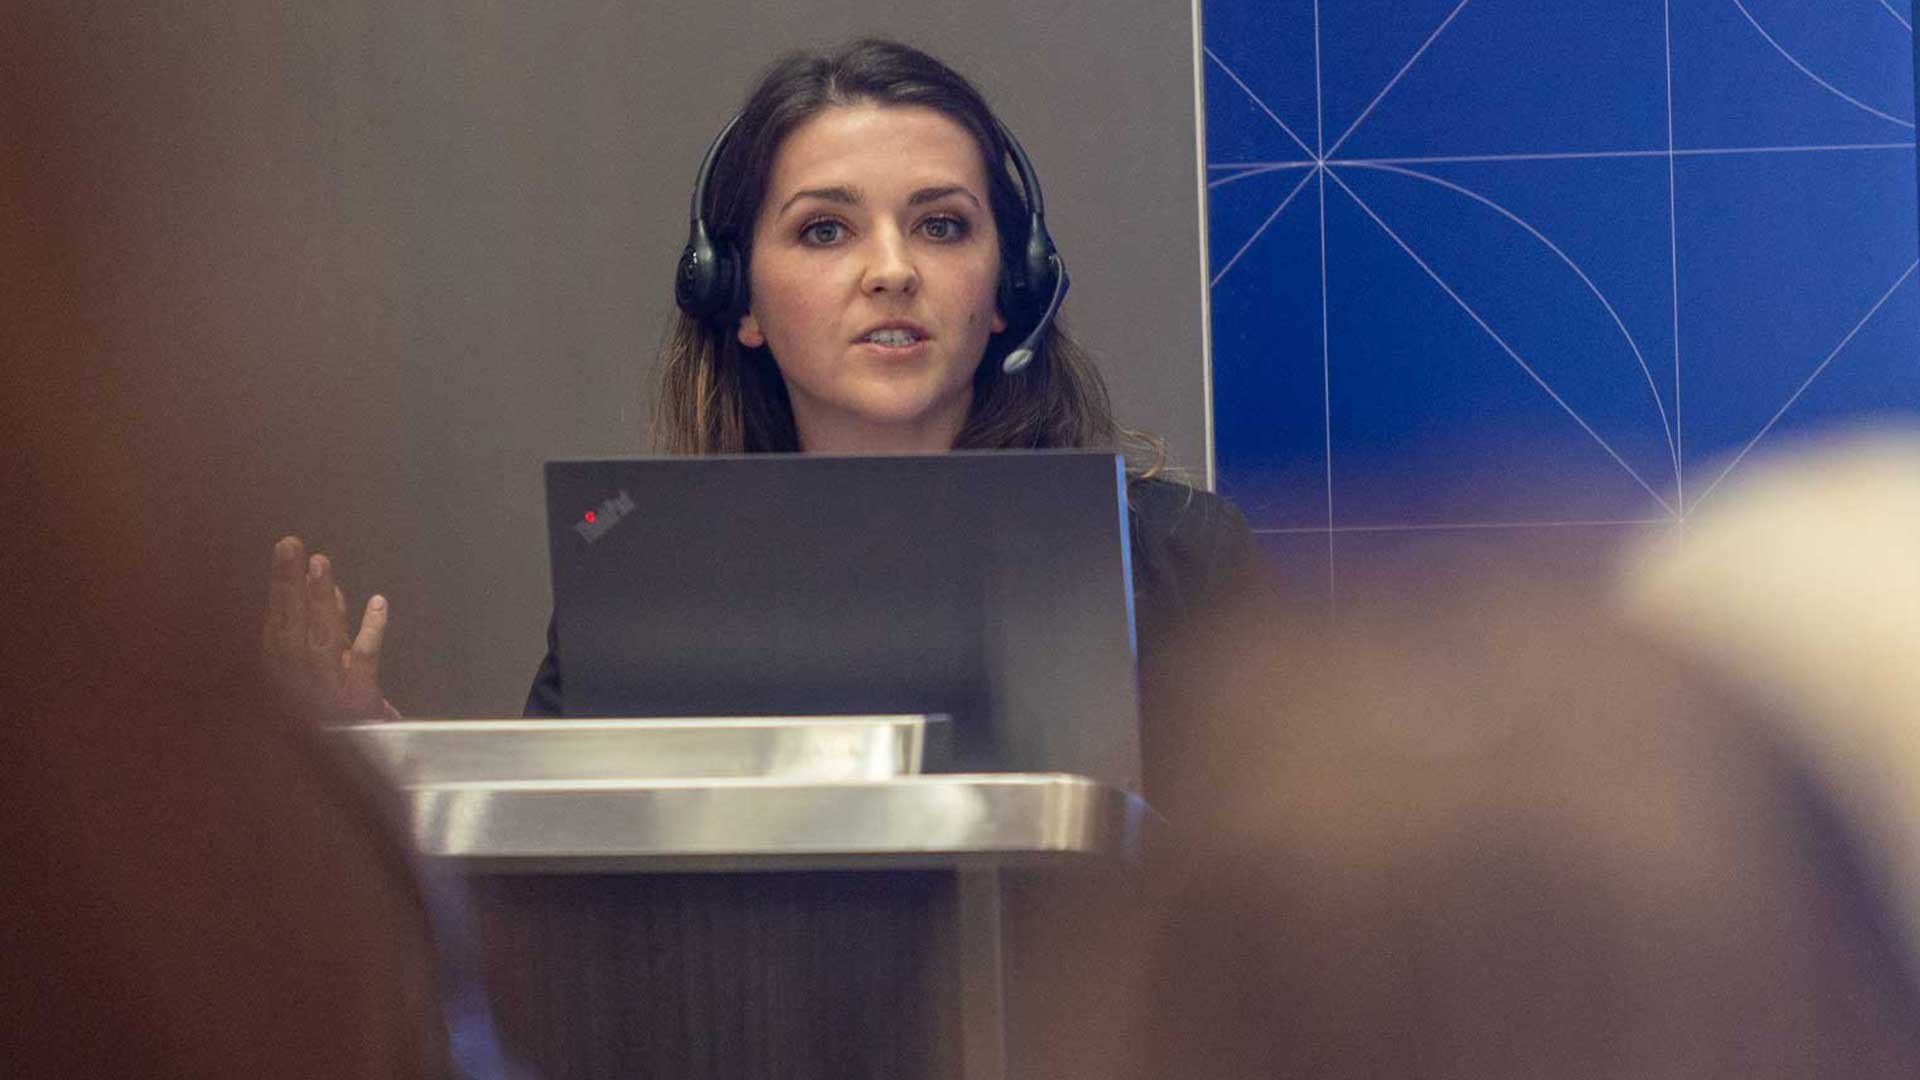 speaker-at-event-with-headset